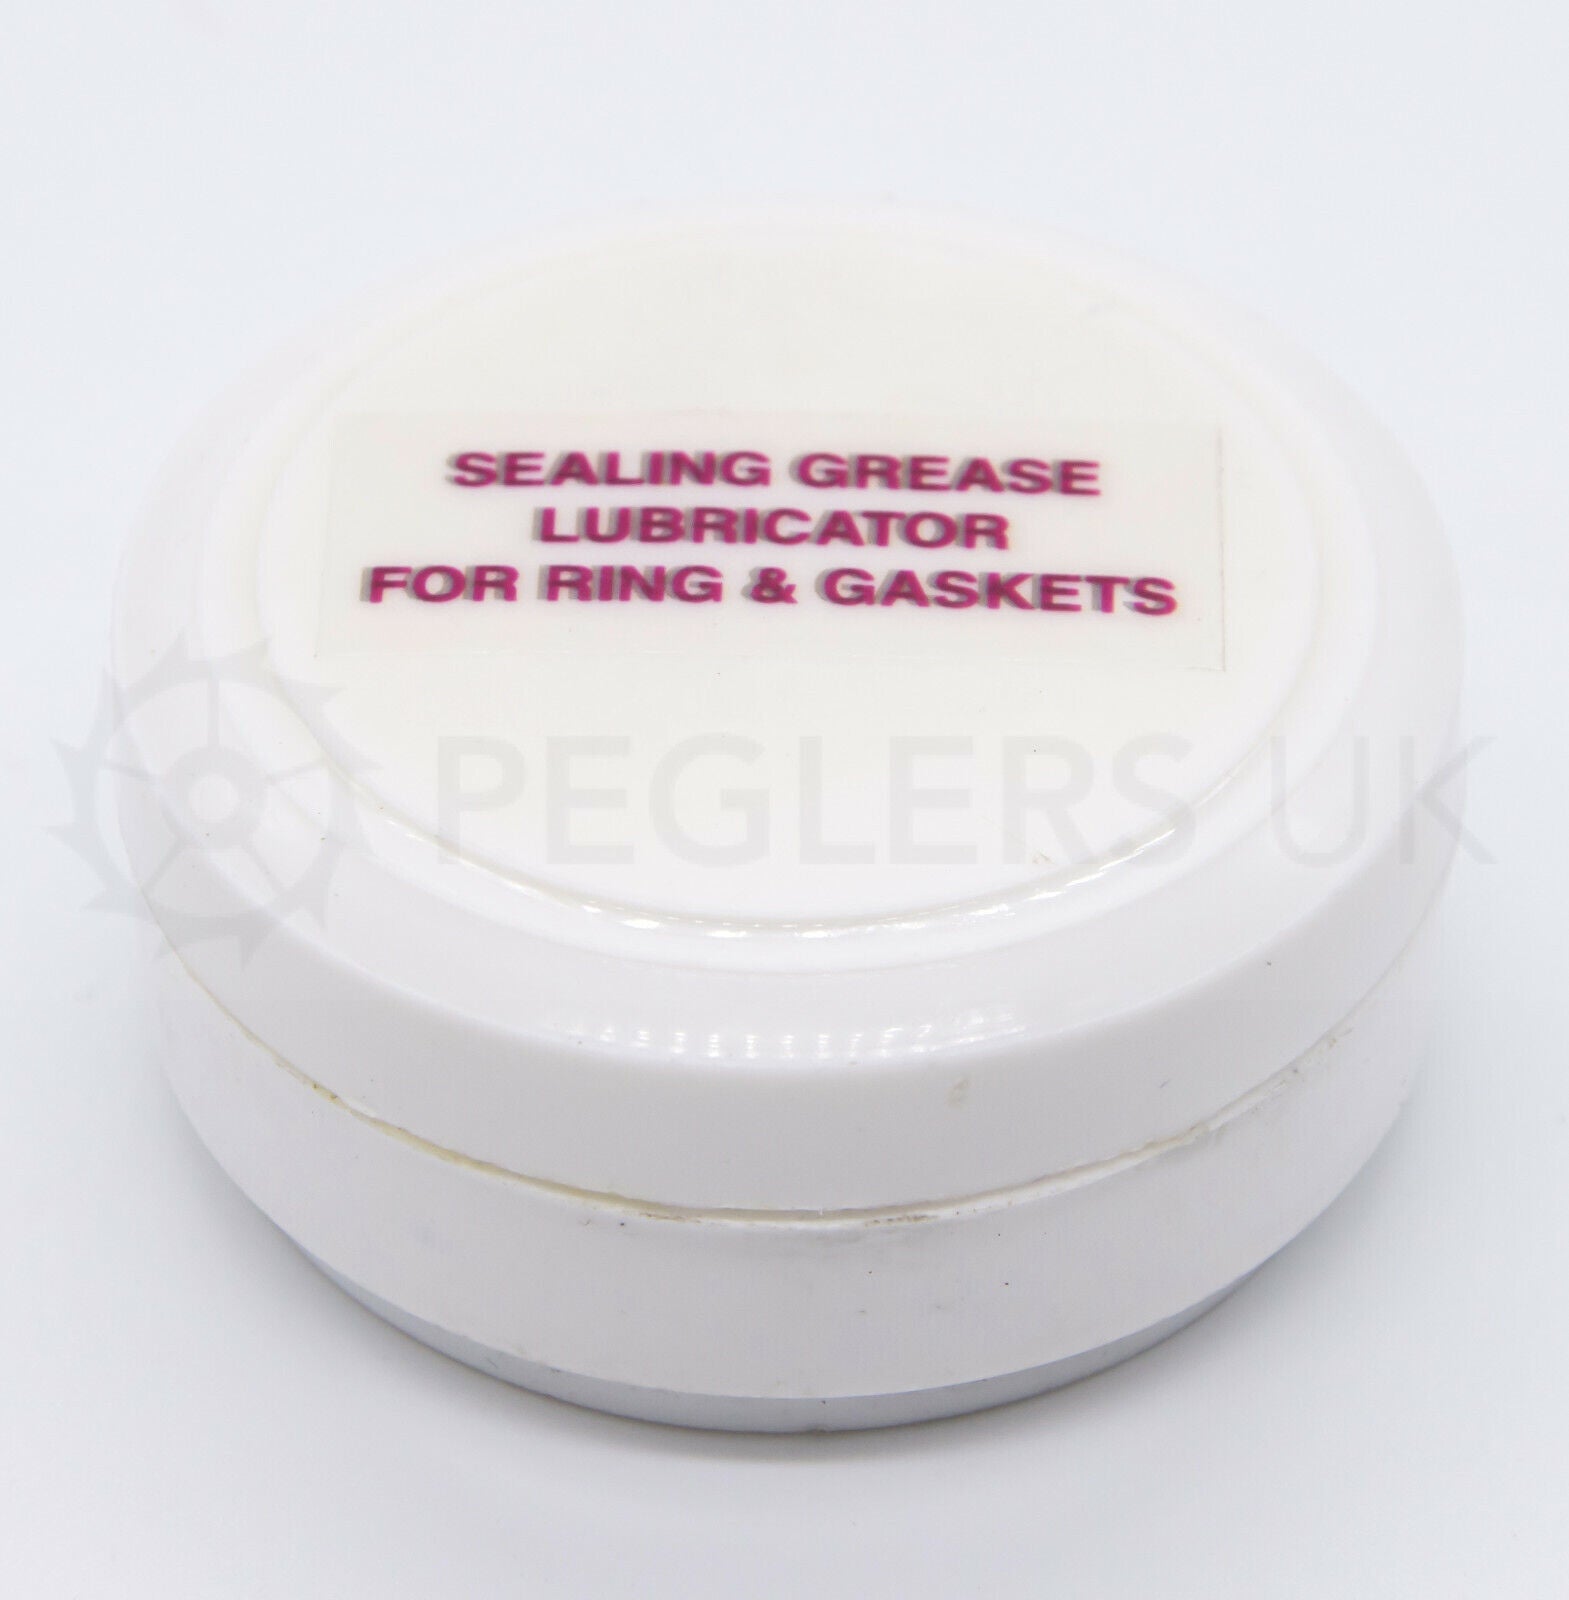 Grease Pads - Silicone Sealing Grease for Gaskets